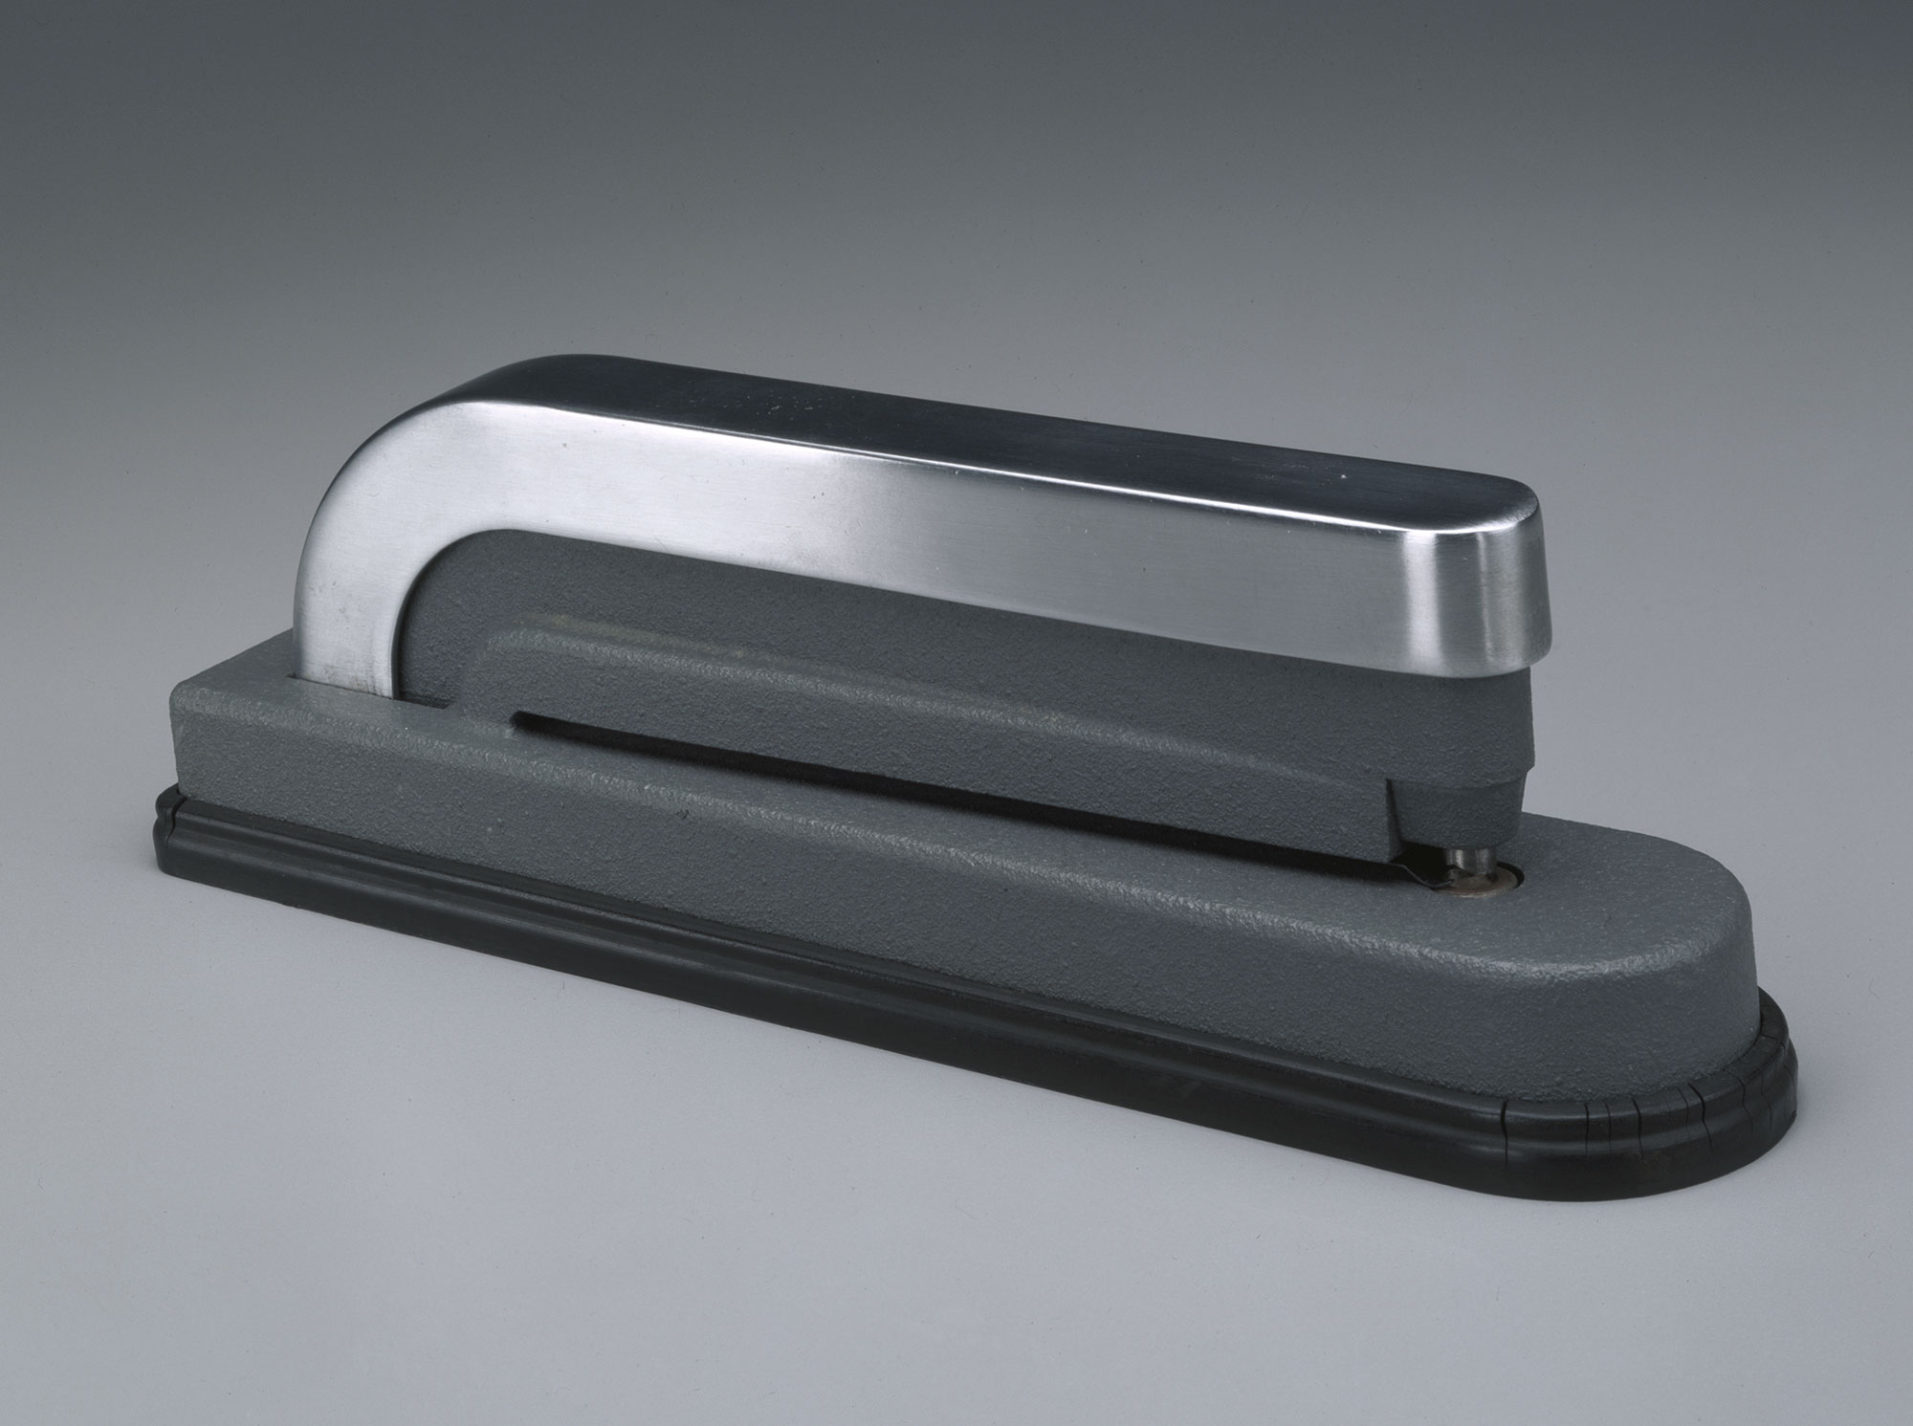 Hole punch in grey and polished metal that resembles a stapler with rounded corners.